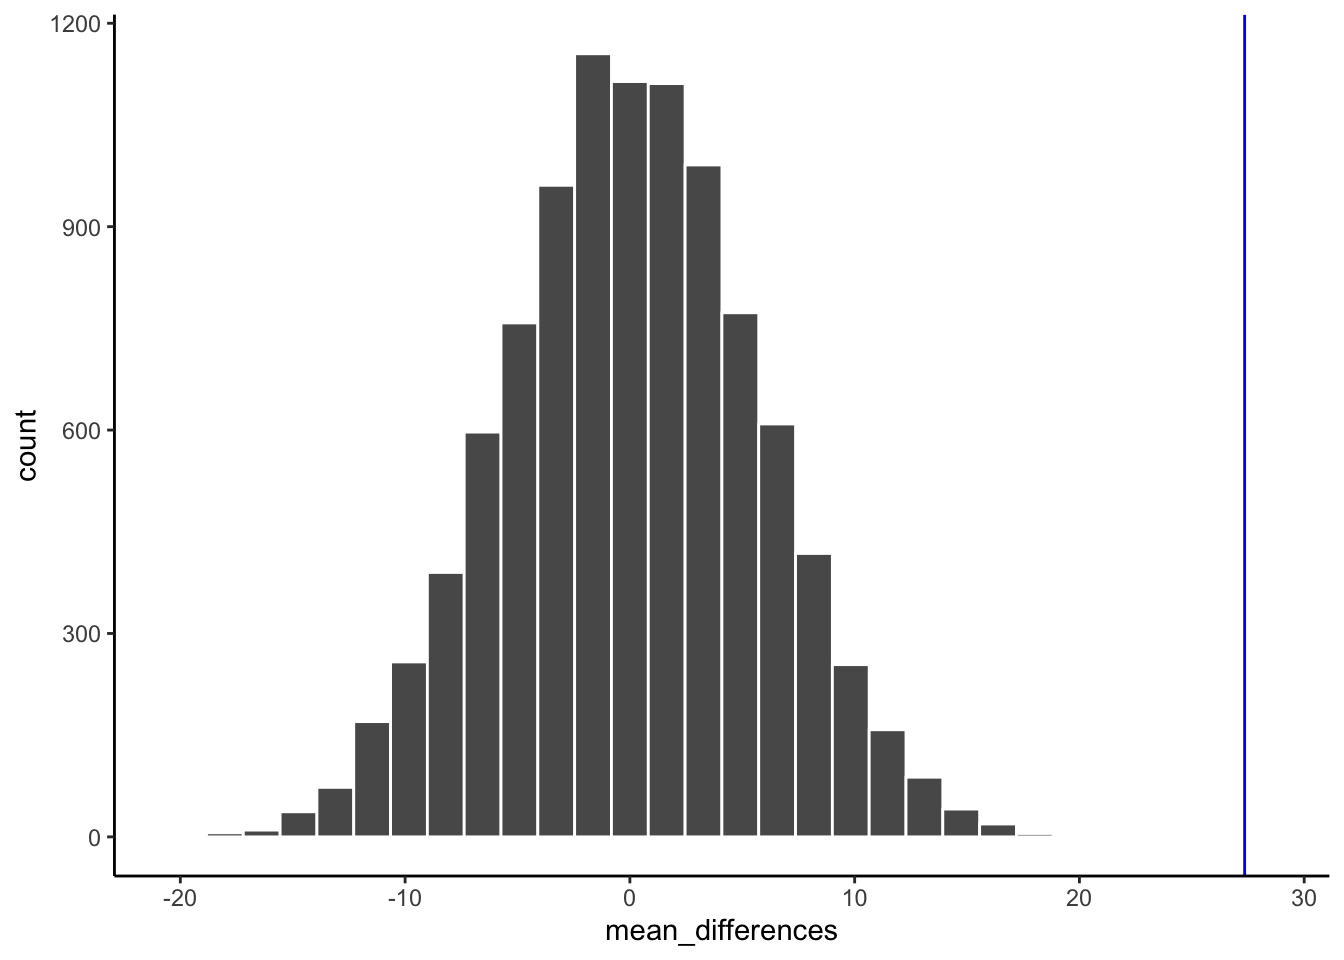 A histogram of simulated mean differences for a randomization test